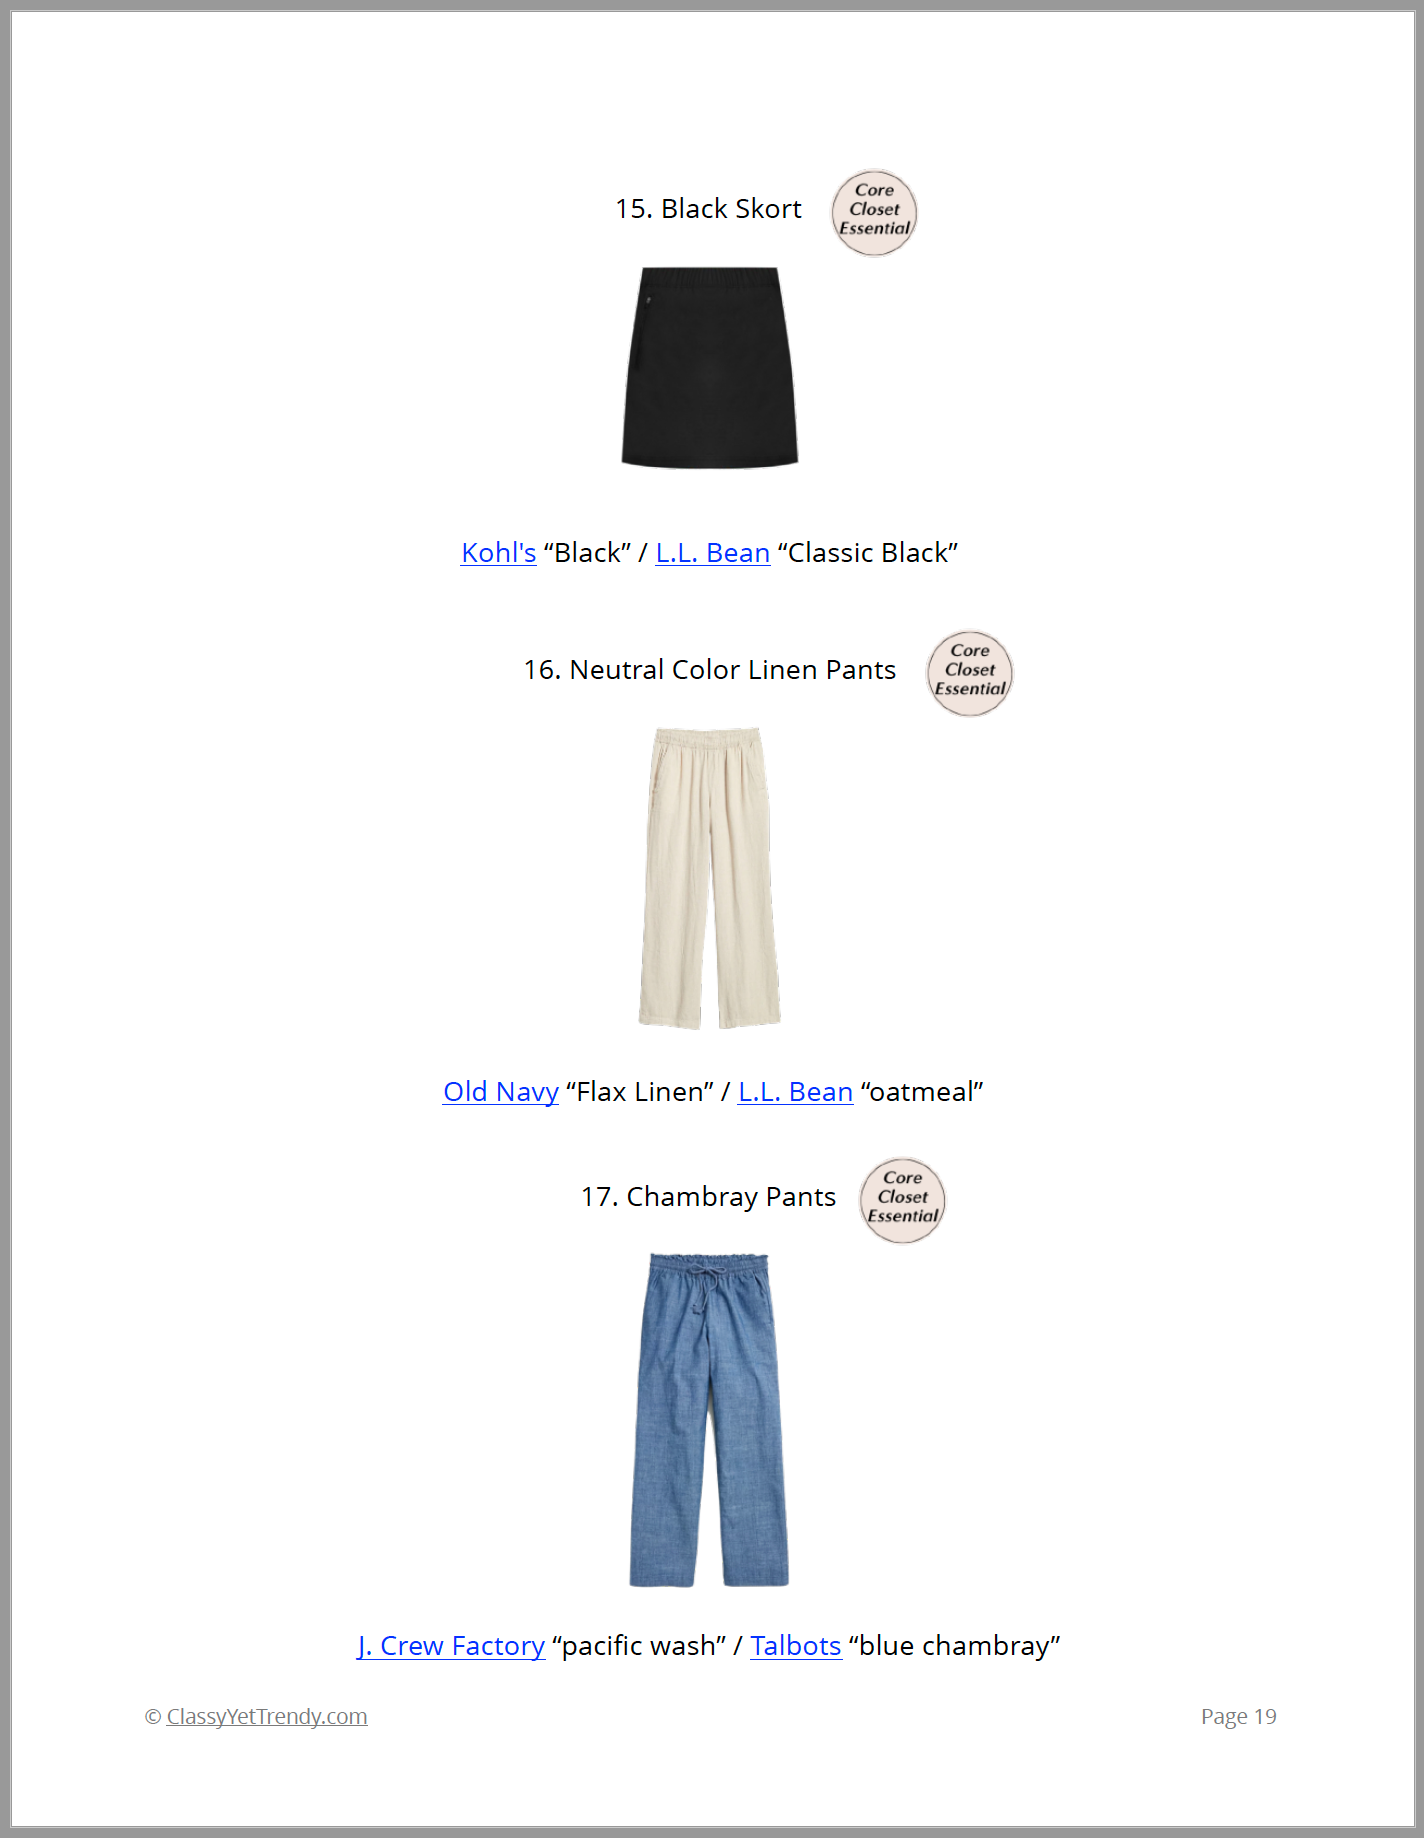 The Workwear Capsule Wardrobe - Summer 2023 Collection